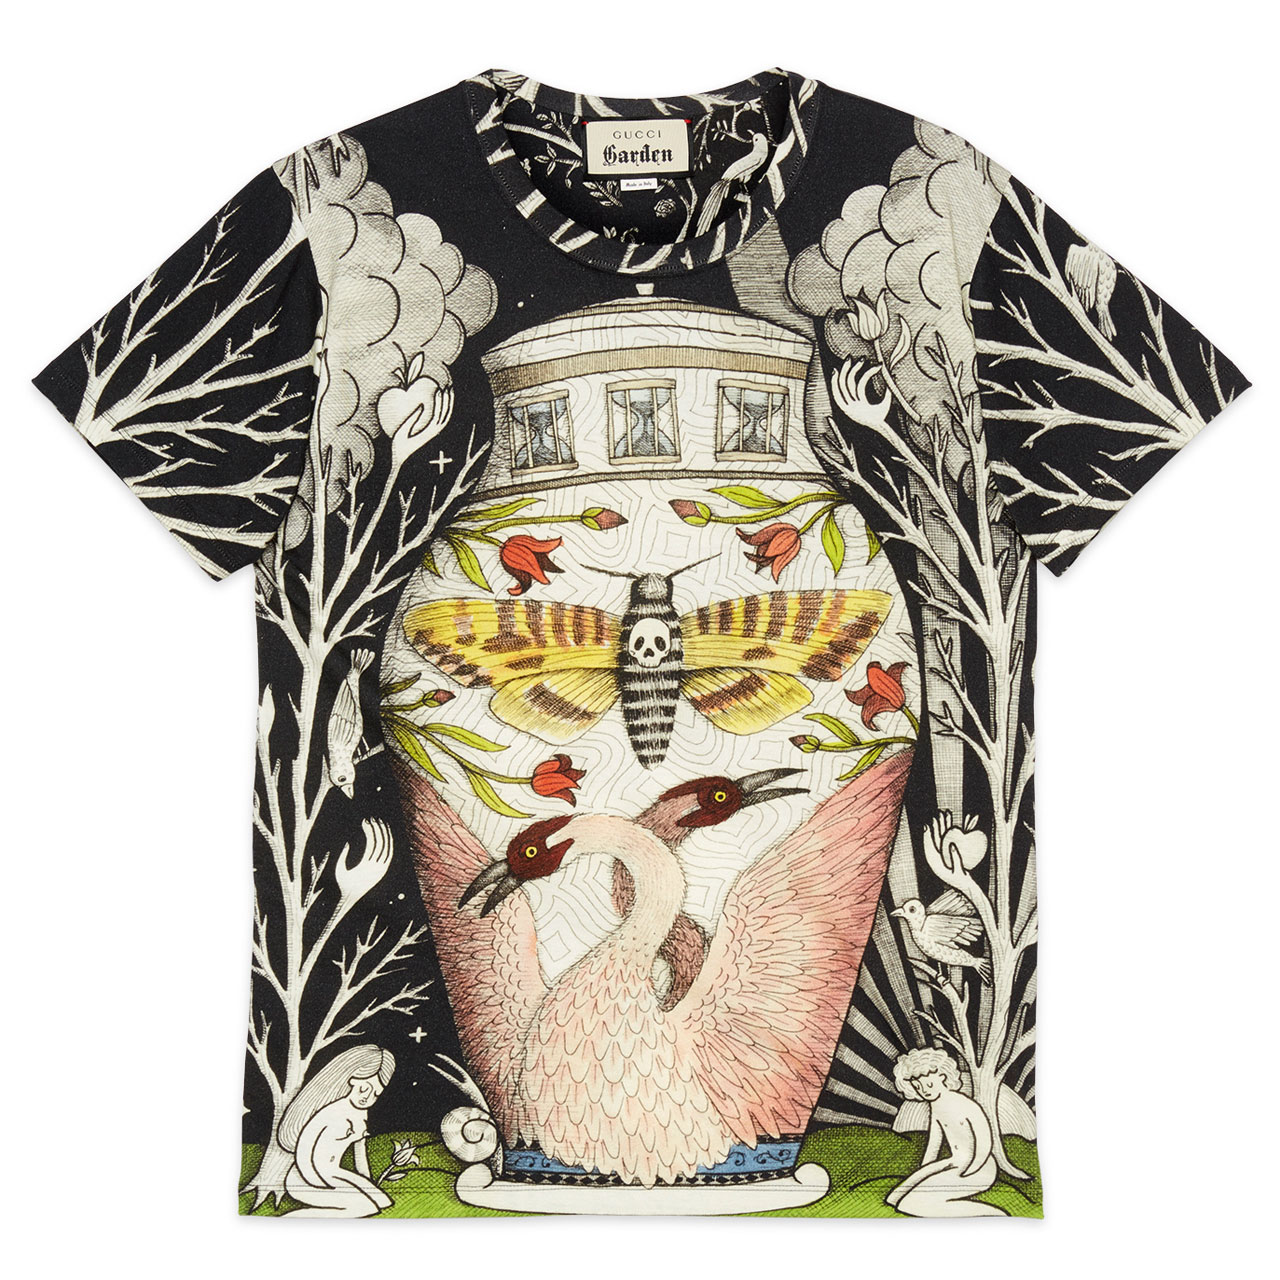 T-shirt from the Gucci Garden series. Photo © Gucci.